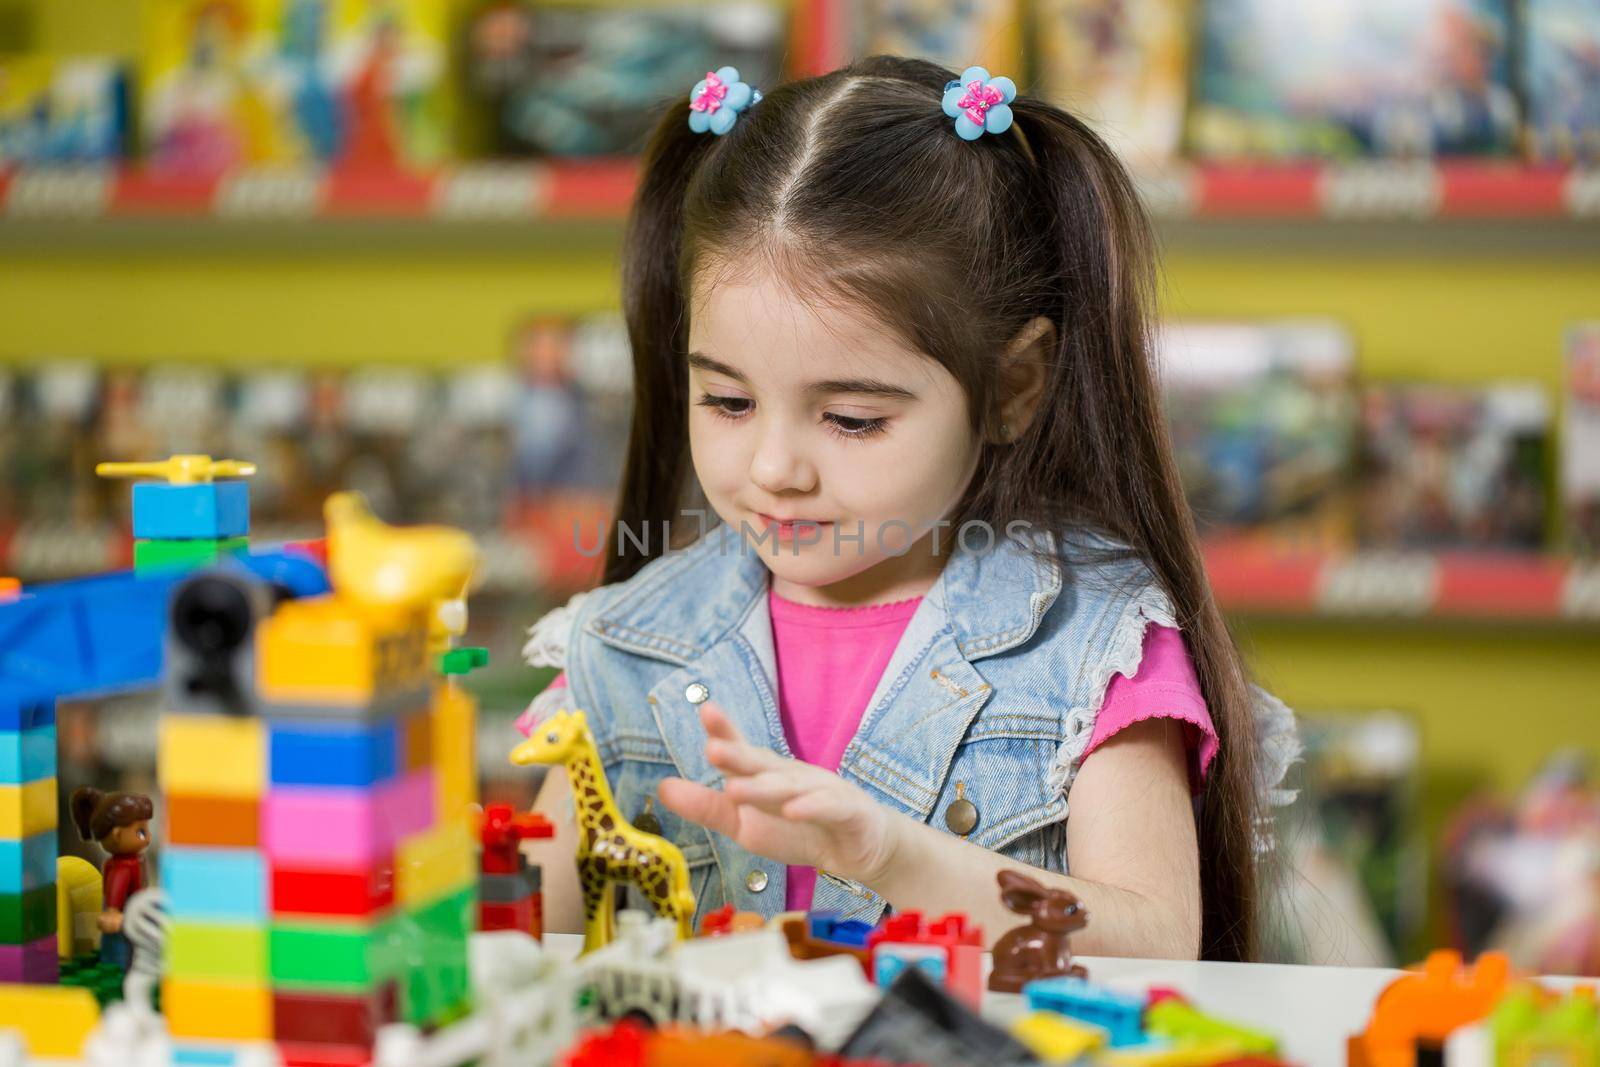 Little girl playing with building blocks in the store. by StudioPeace